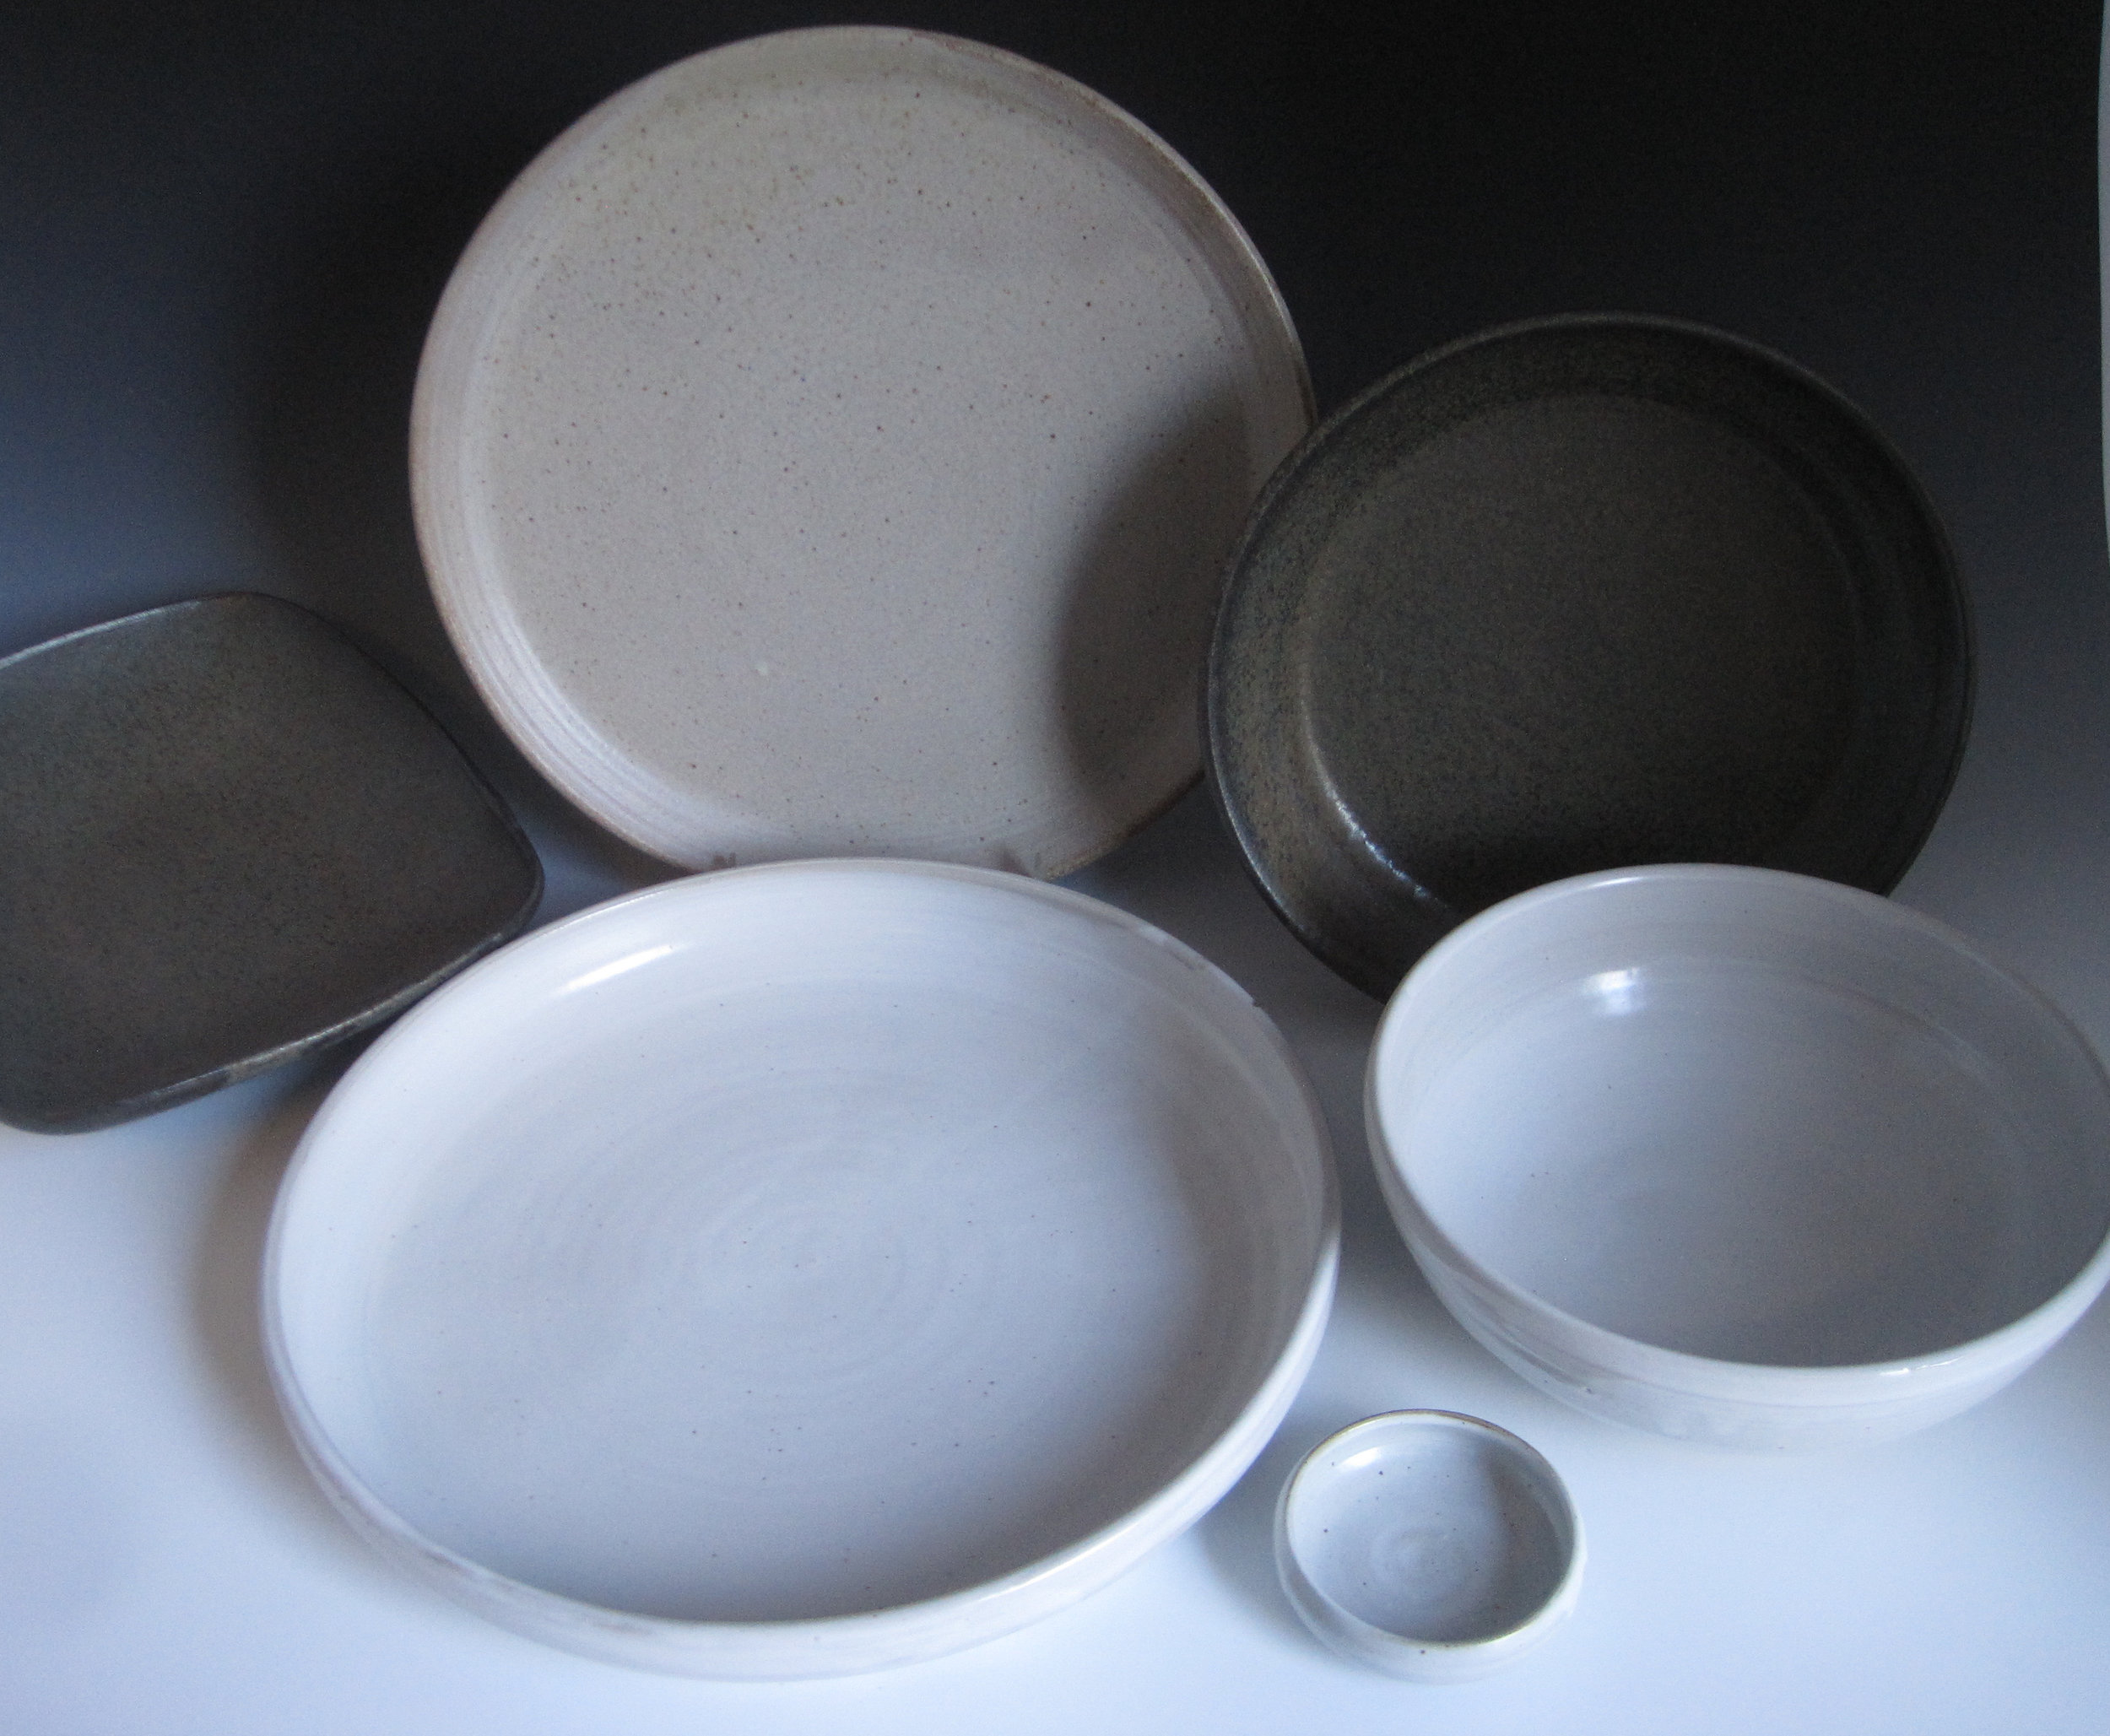 Clockwise from left: Comfort Dish, Slope Rim Plate, Pie, Bistro, Dollop, Clement